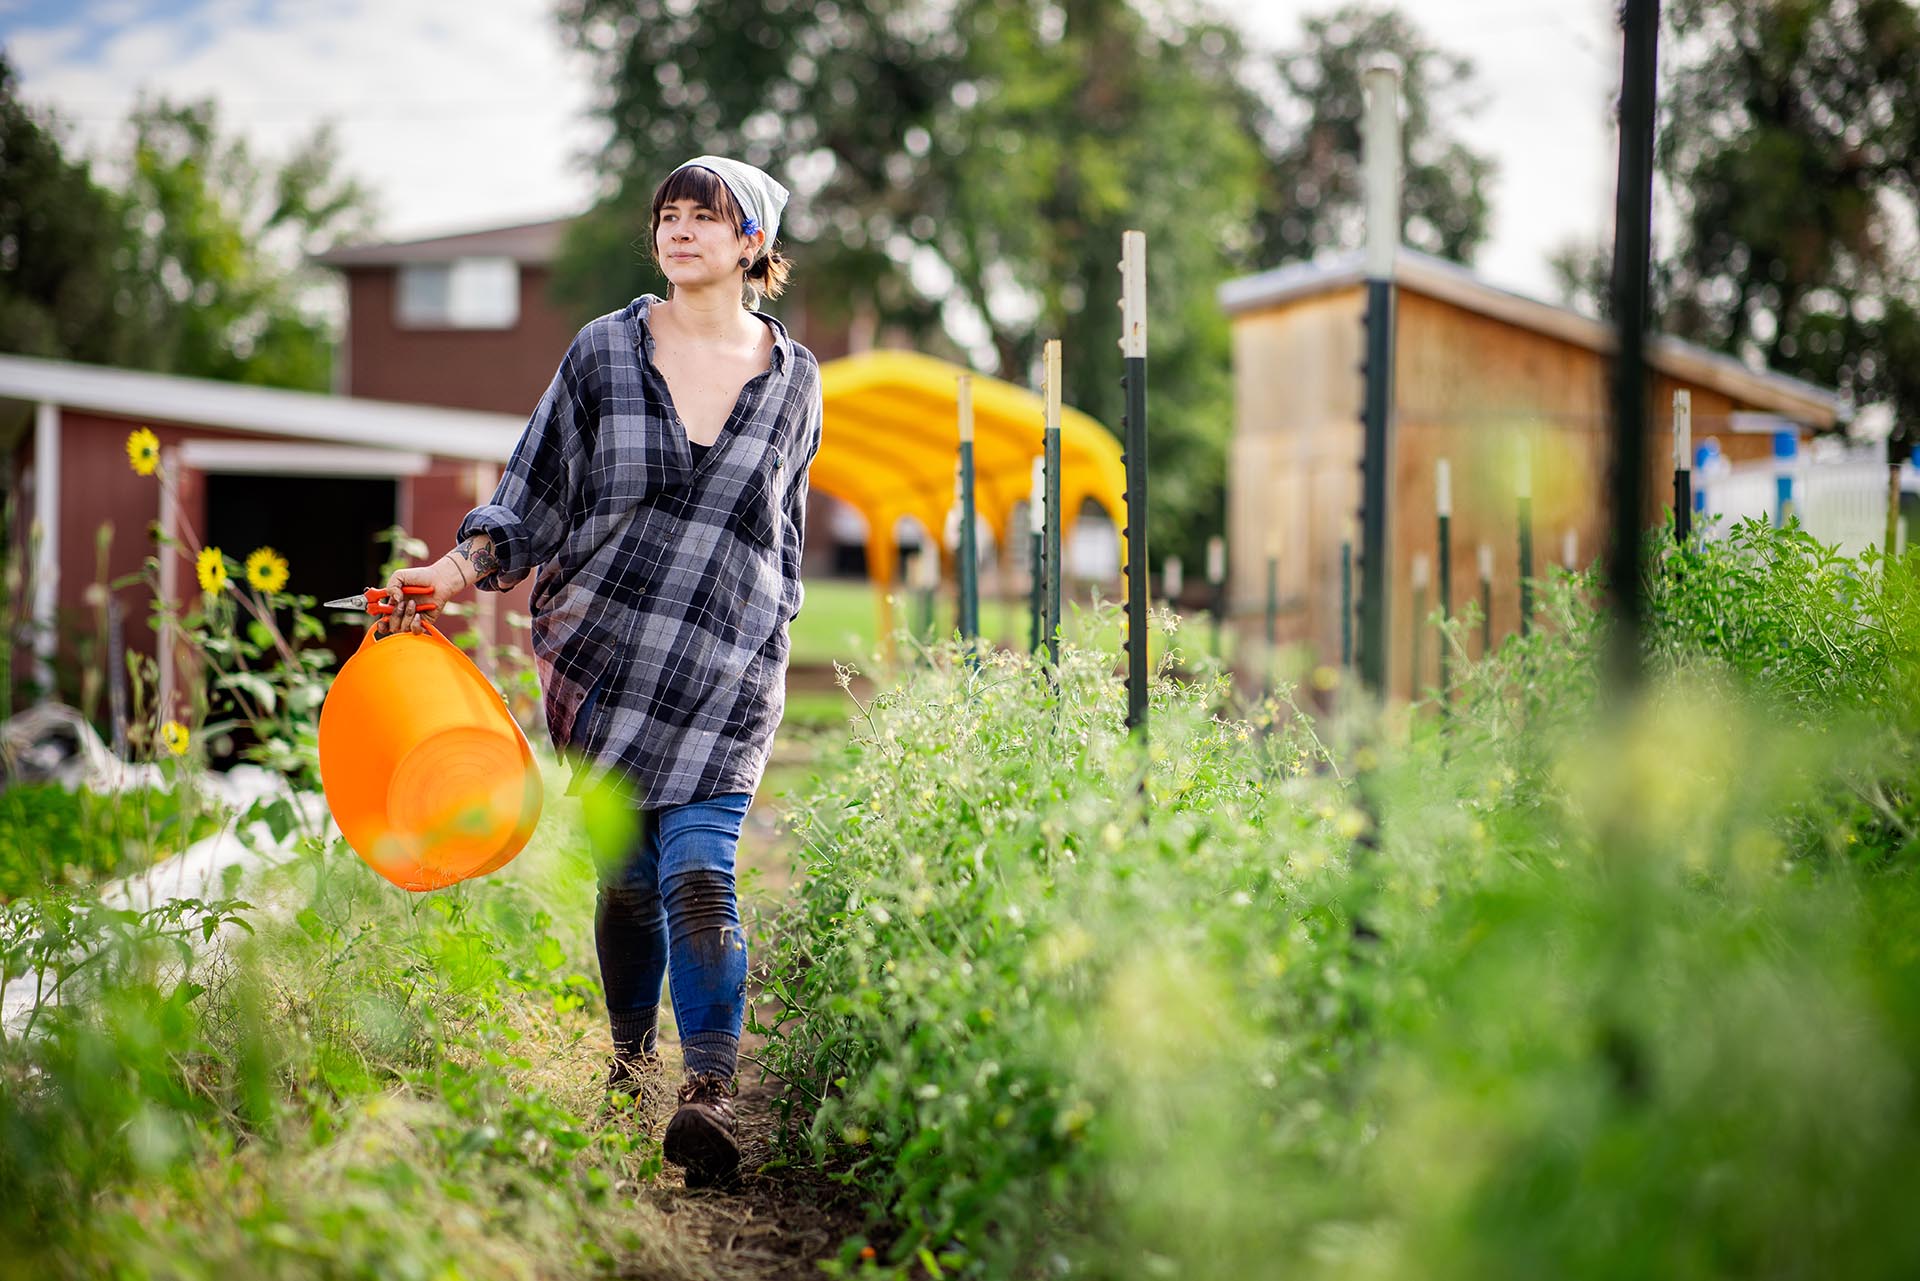 Angelica Marley, works seasonally at a nonprofit called Sprout City Farms